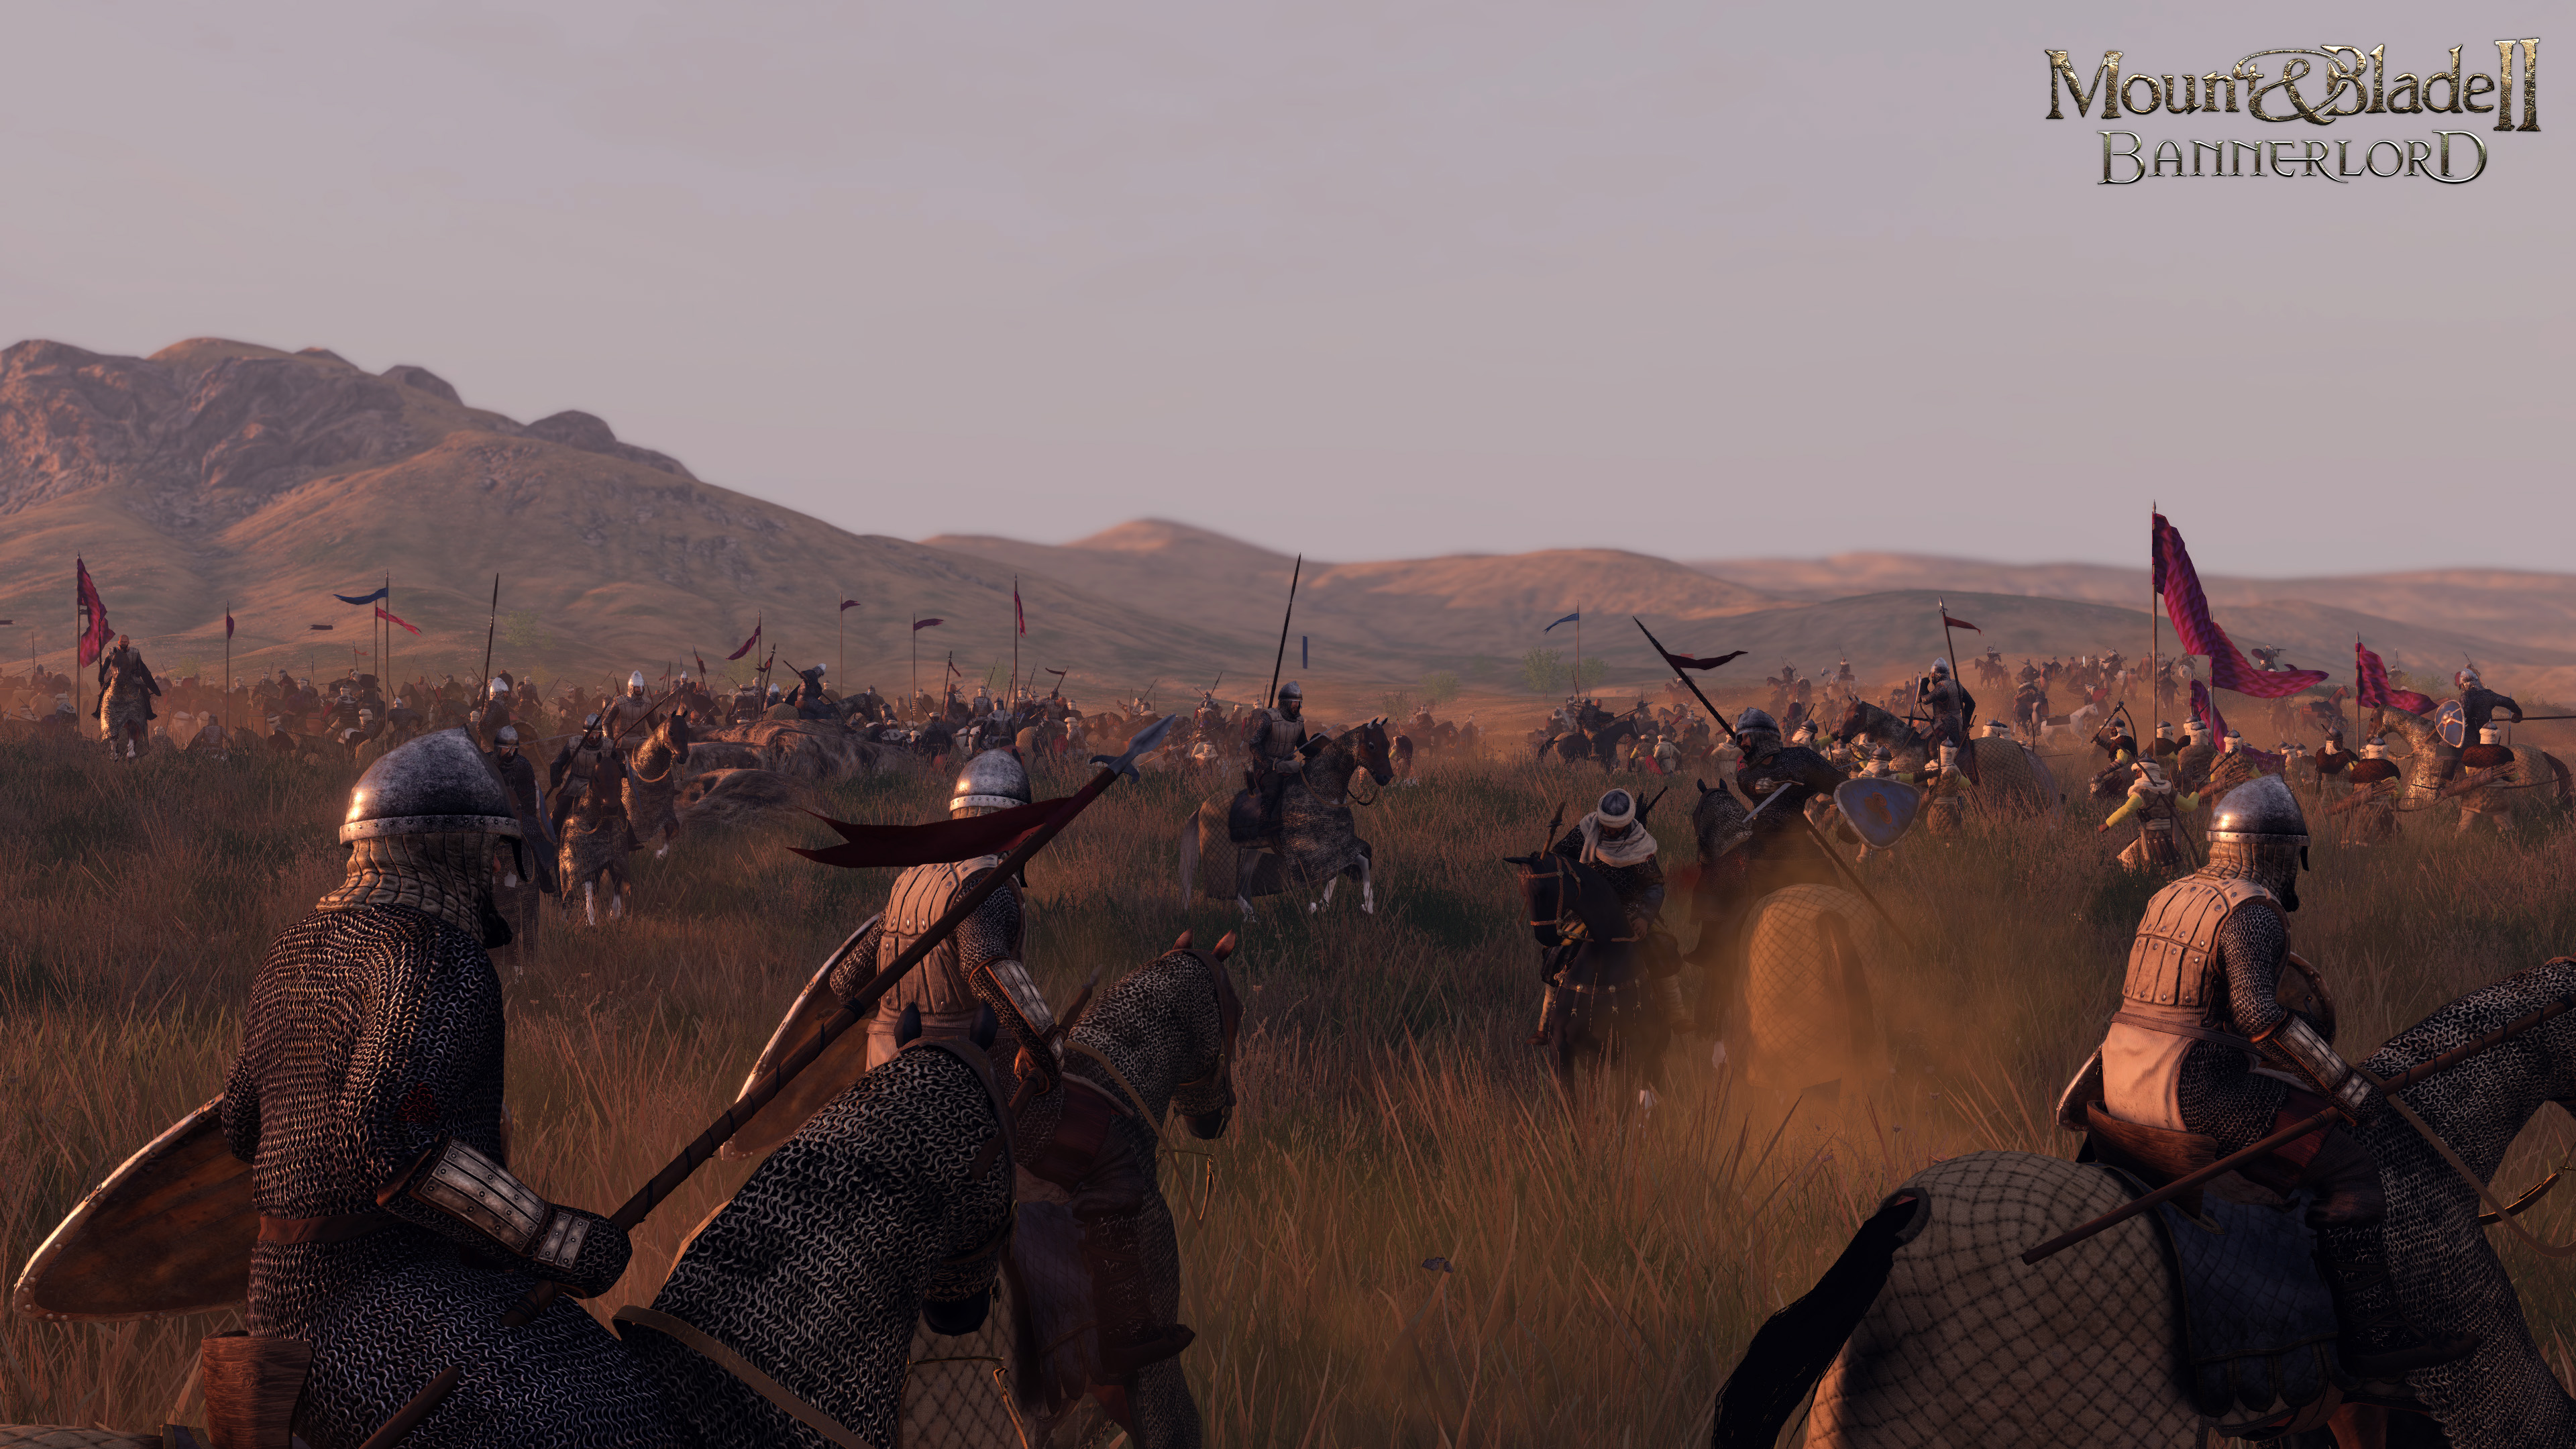 Mount and blade bannerlord караваны. Mount and Blade 2. Mount and Blade 2 Bannerlord. Монтен блейд баннерлорд. Mount and Blade 2 Bannerlord ВЛАНДИЯ.